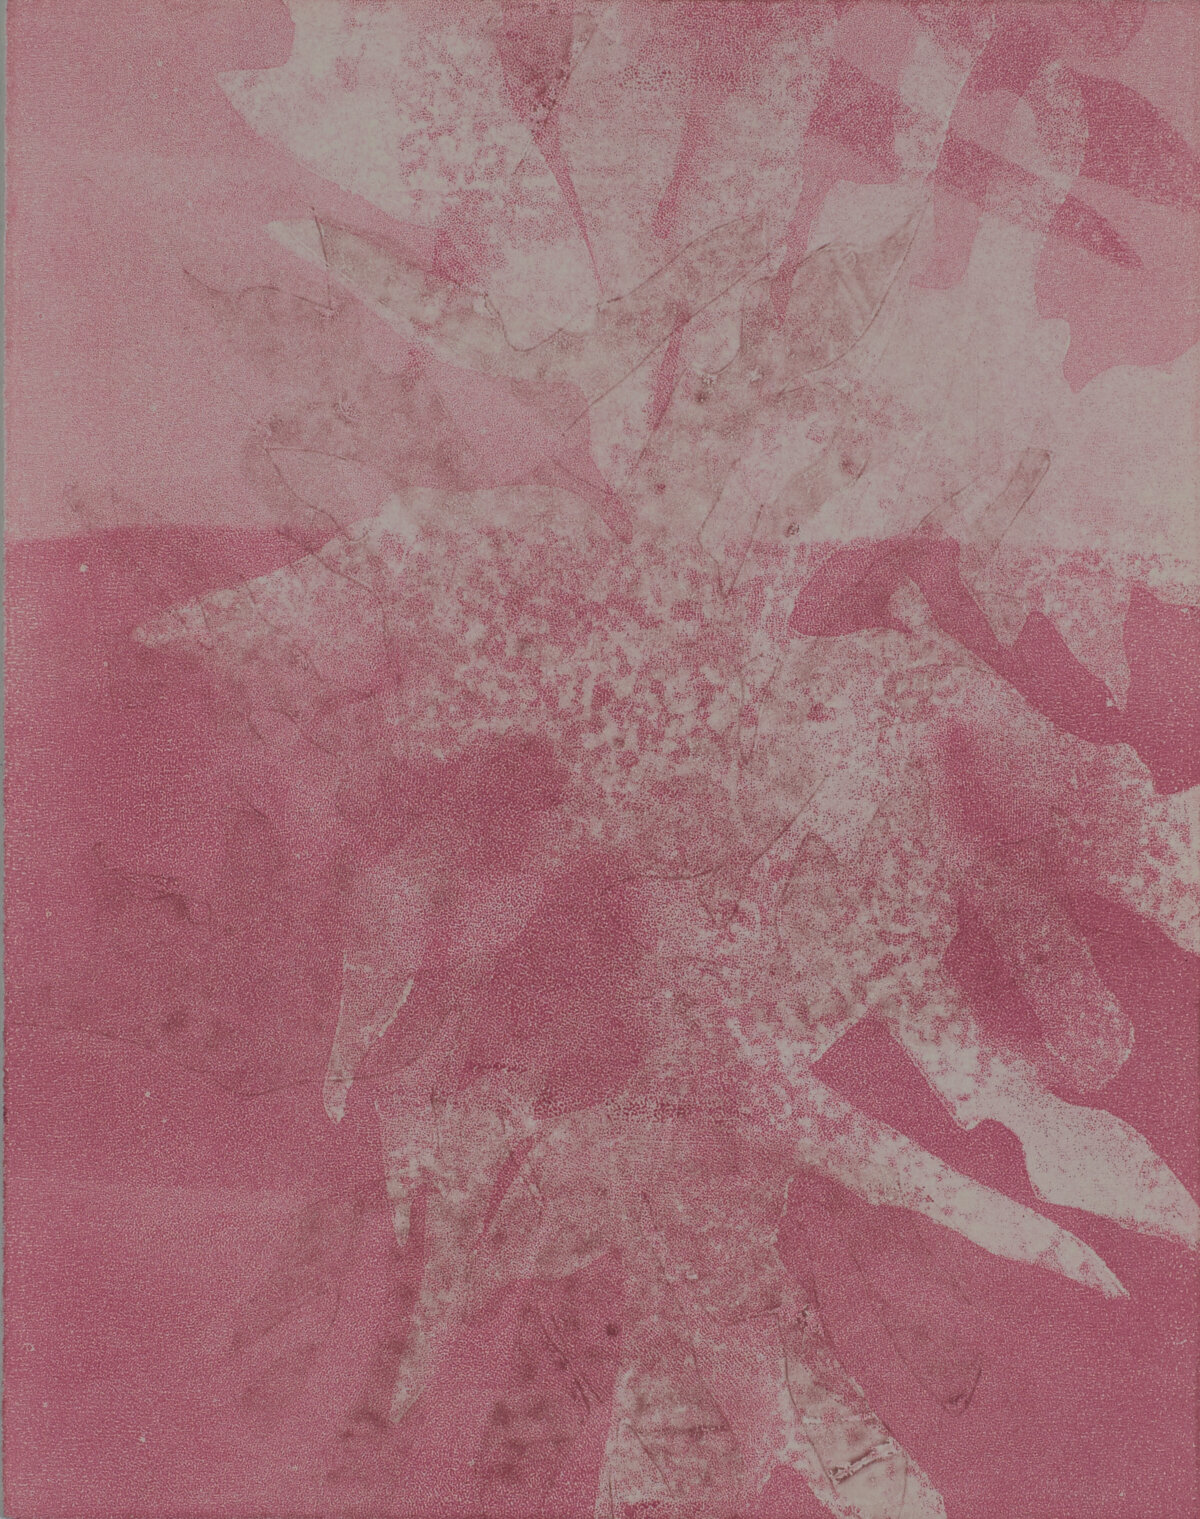   Blurred Memories X  monotype, 11.25 x 8.75 inches 